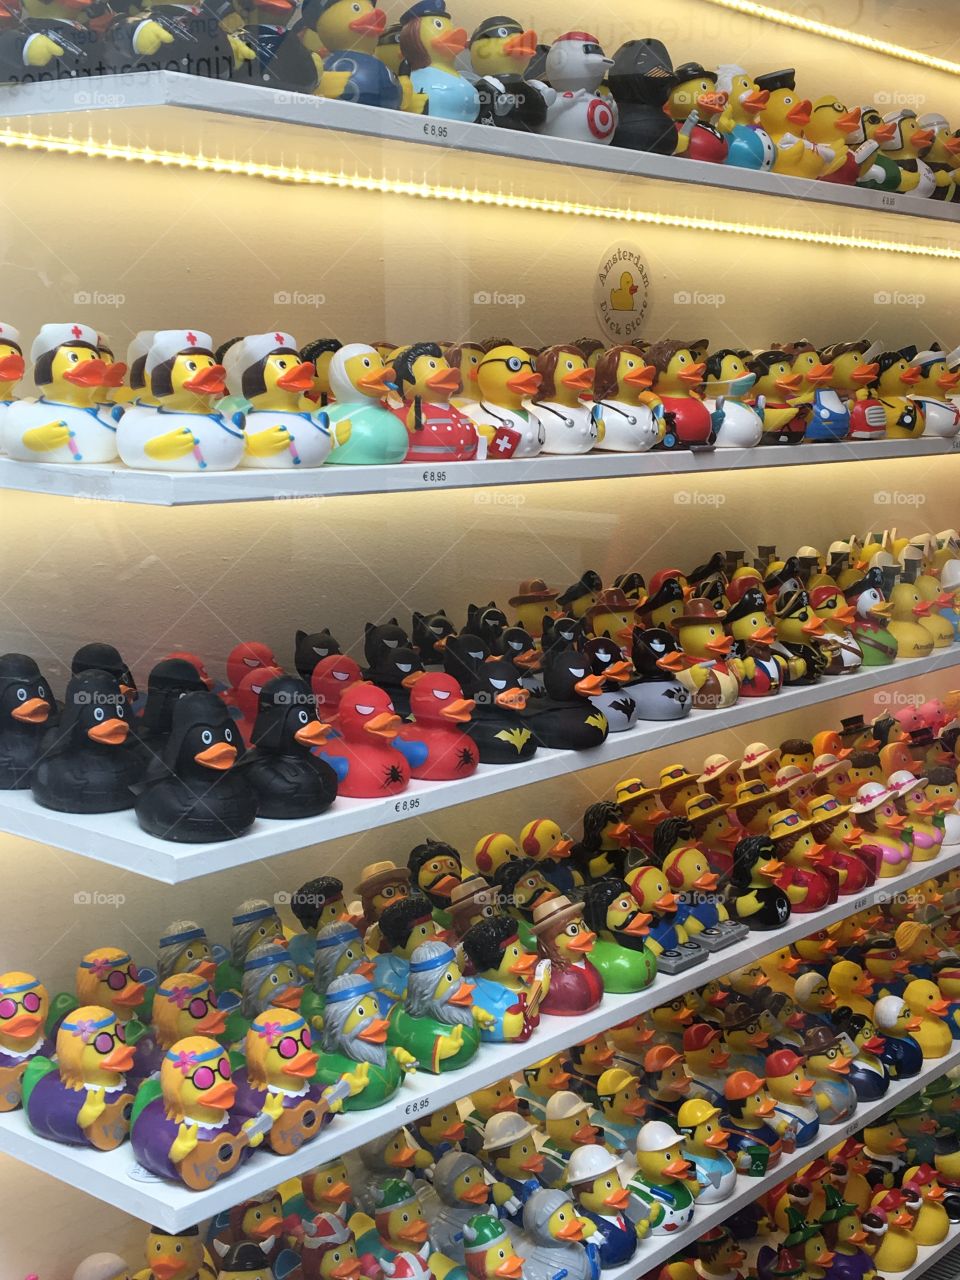 So many rubber ducks all in different outfits! Crazy shop in Amsterdam!!